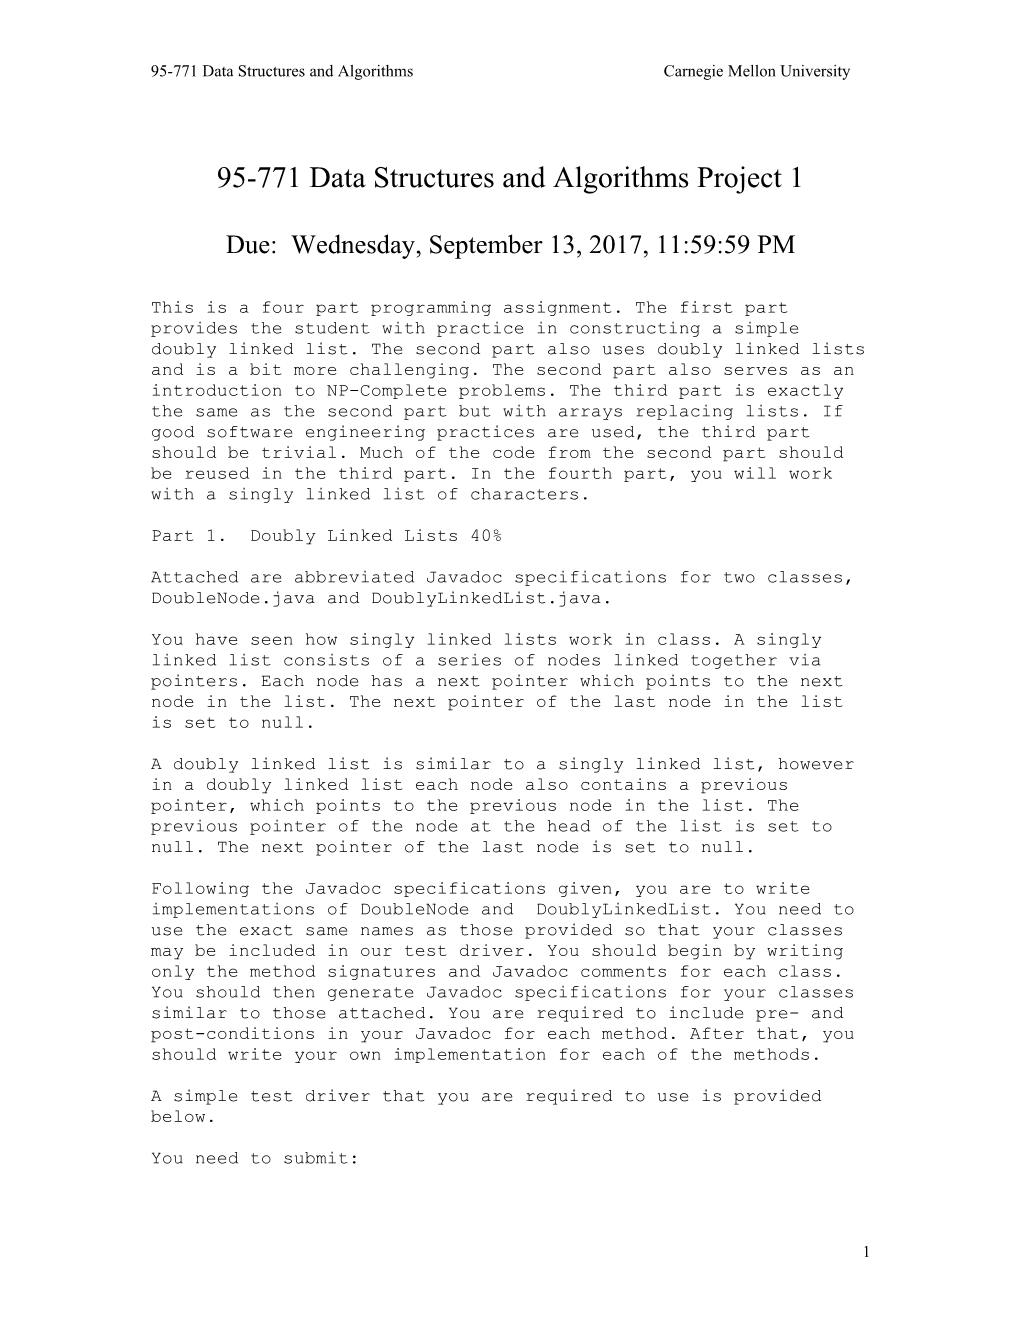 95-771 Data Structures and Algorithms Homework 1